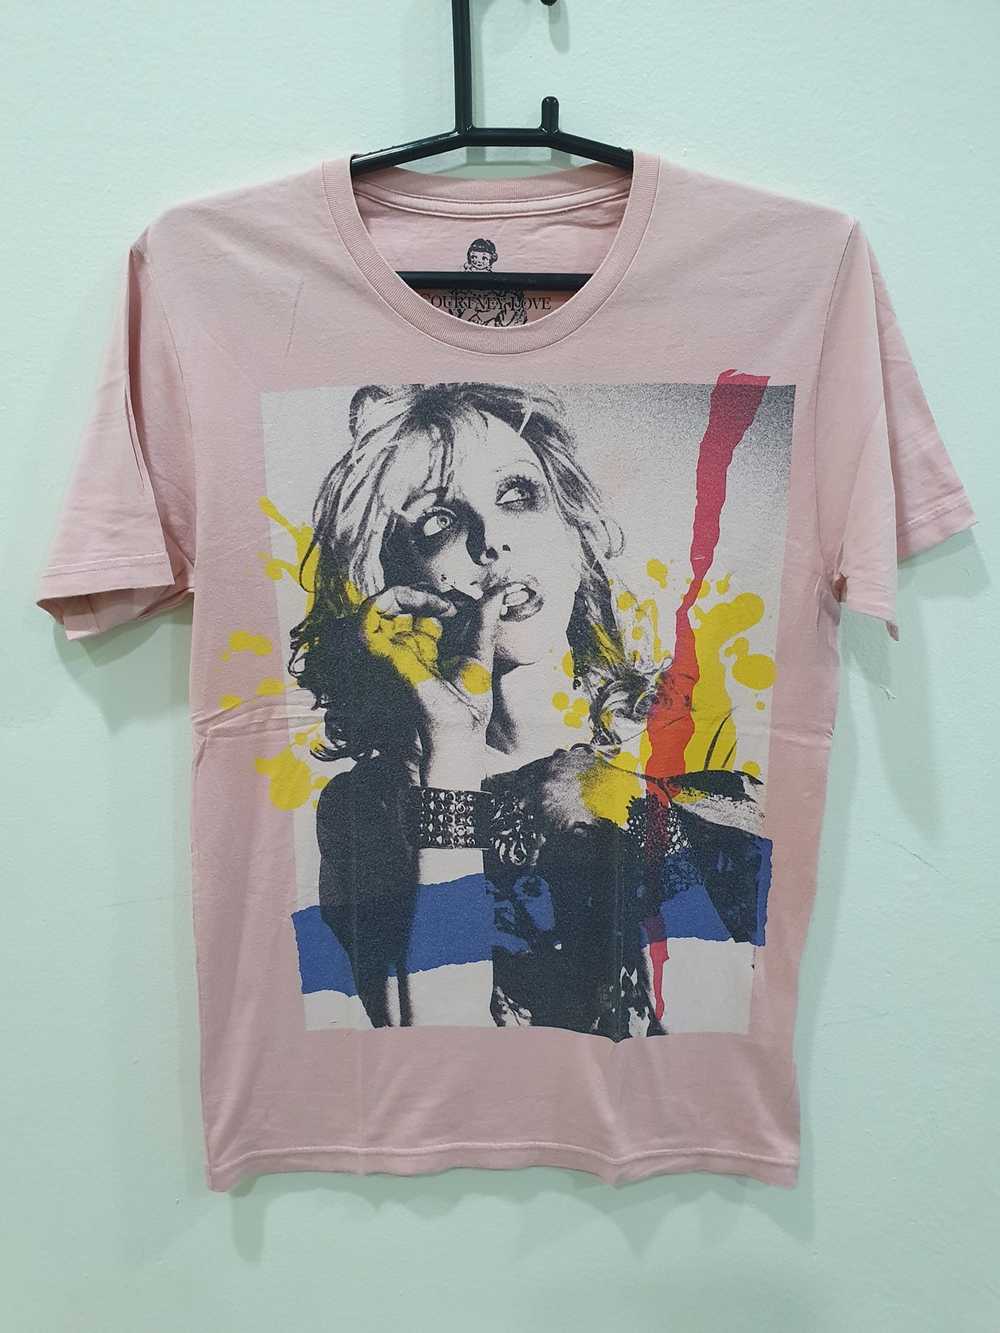 Hysteric Glamour hysteric glamour x courtney love - image 1